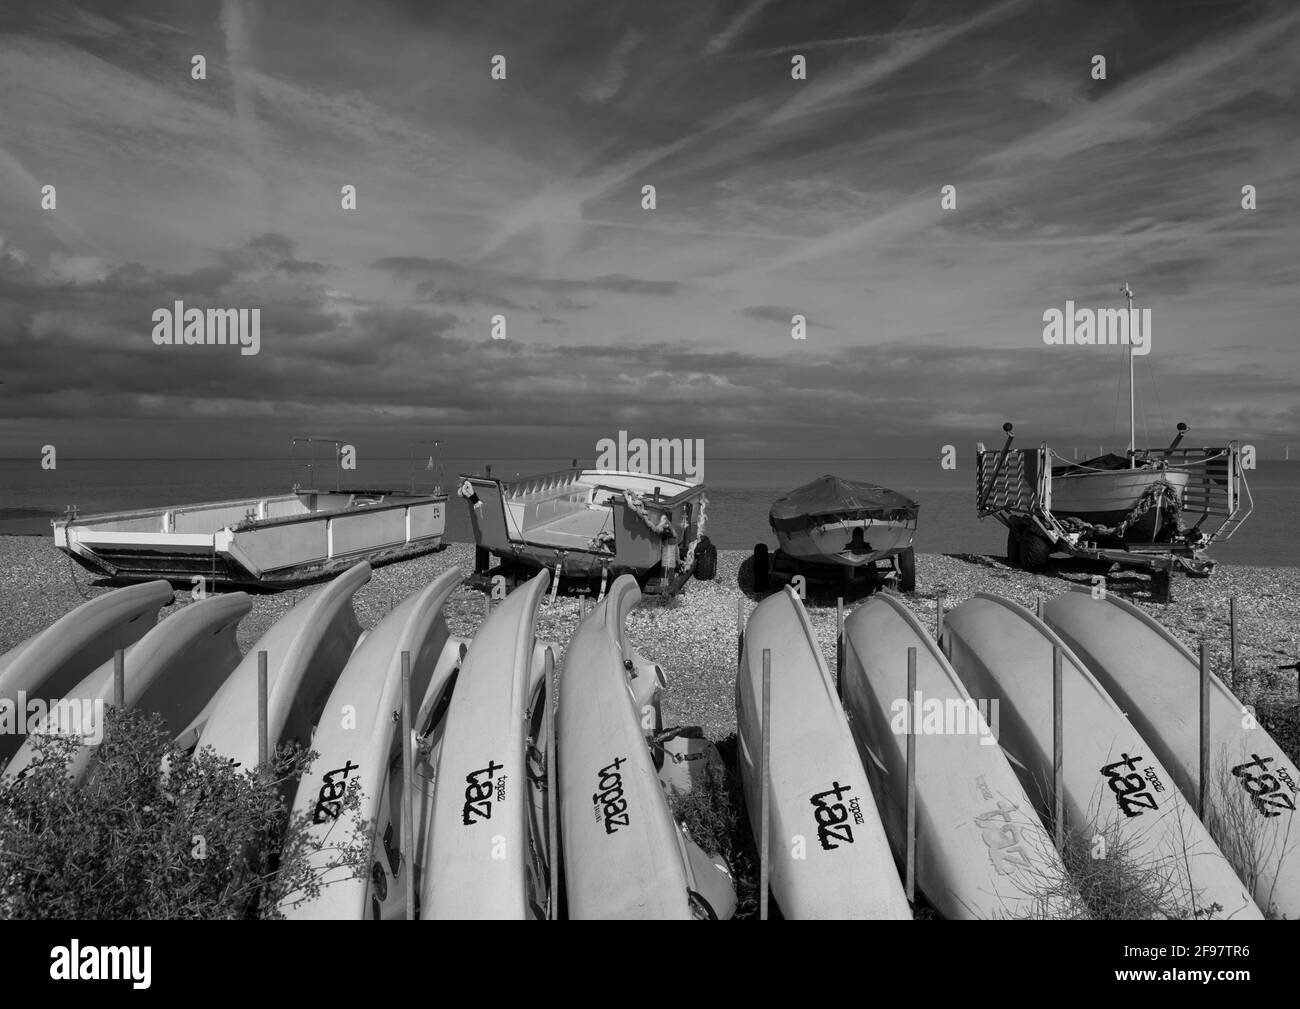 Monochrome image of boats on the beach at Whitstable, Kent, UK, with aircraft con trails in the sky. Stock Photo